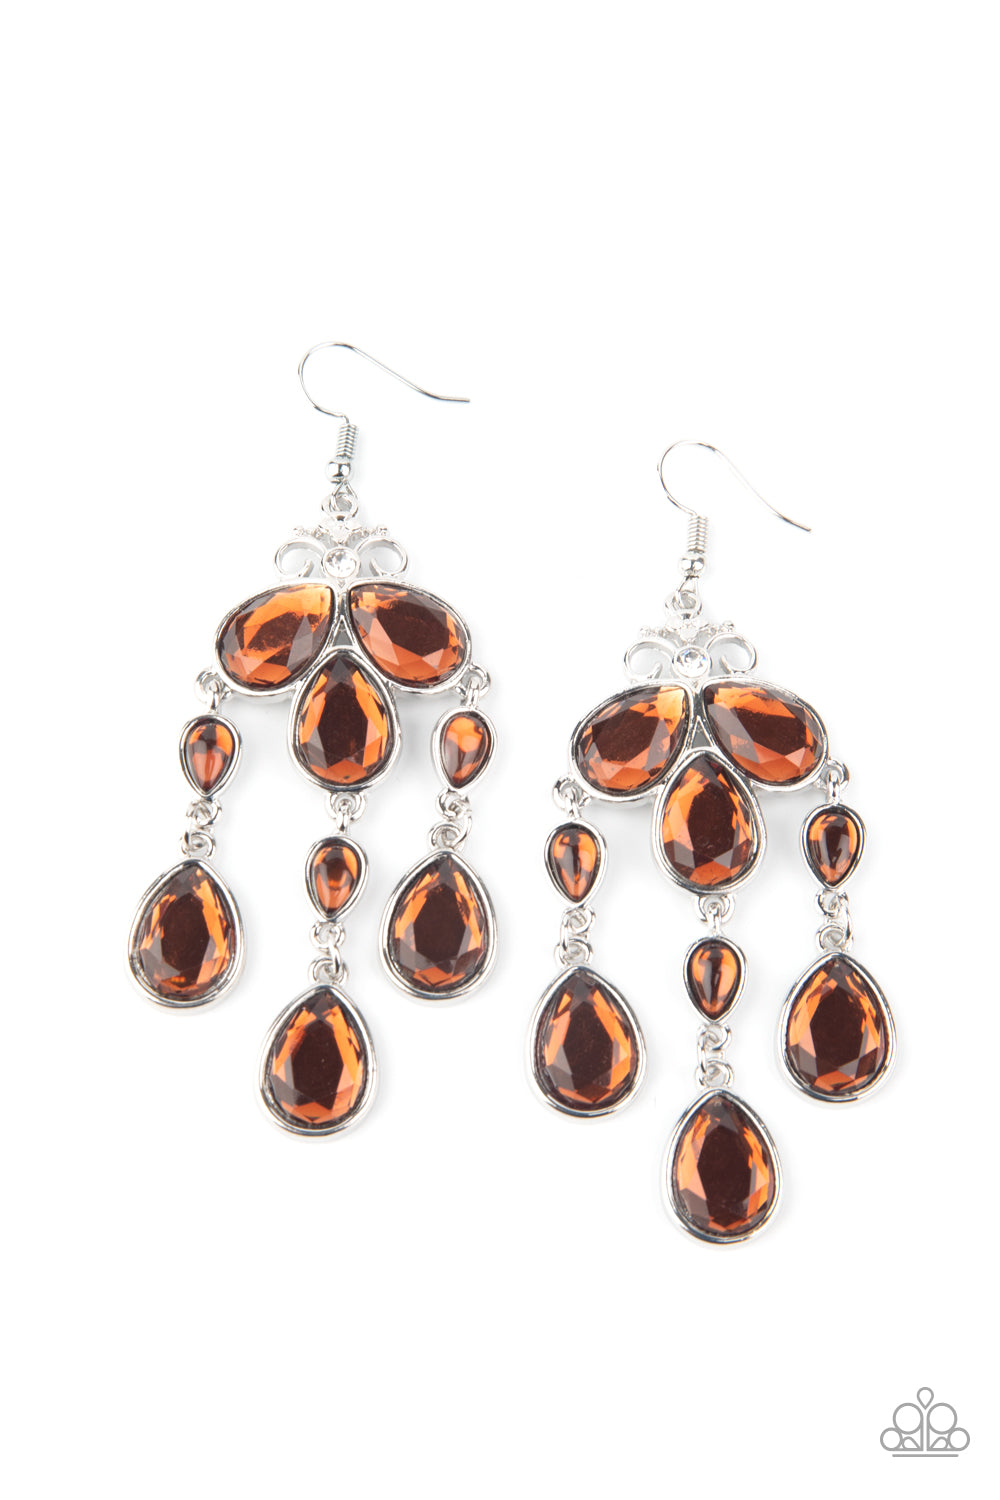 Paparazzi Accessories - Clear The HEIR - Brown Earrings